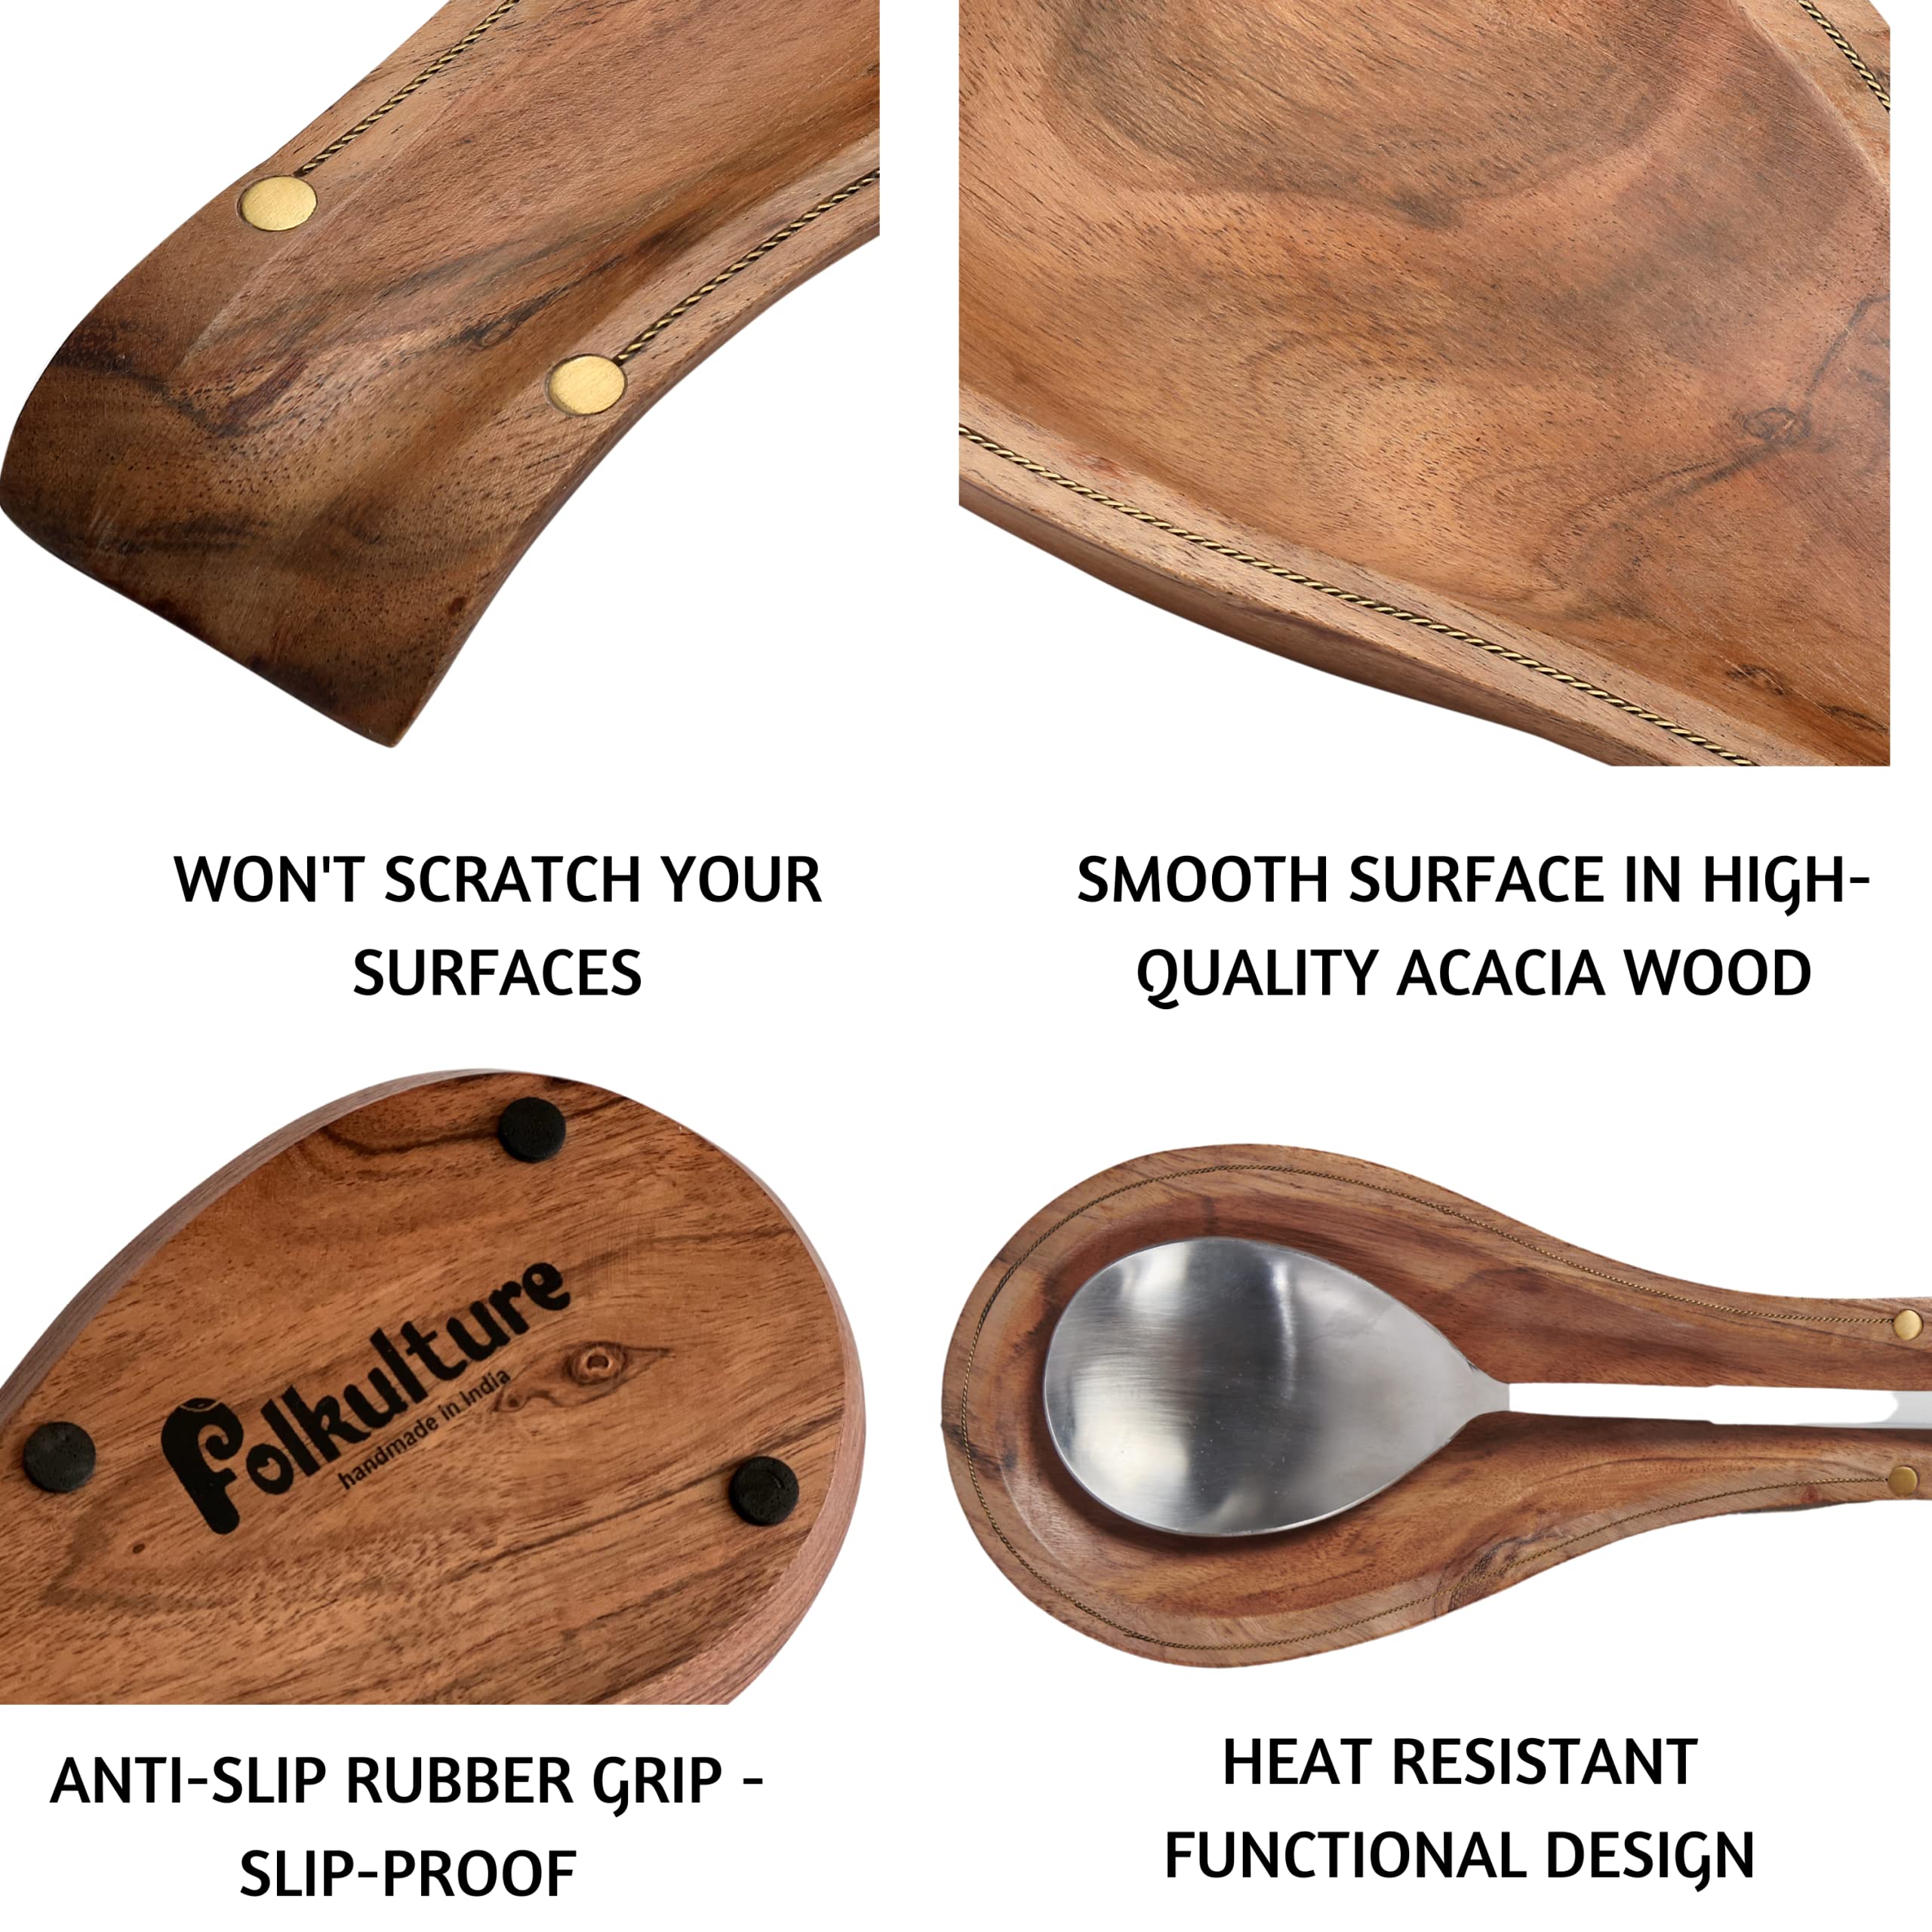 Folkulture Spoon Rest for Kitchen Counter, Spoon Holder for Stove and Salad Tongs or Tongs for Cooking,